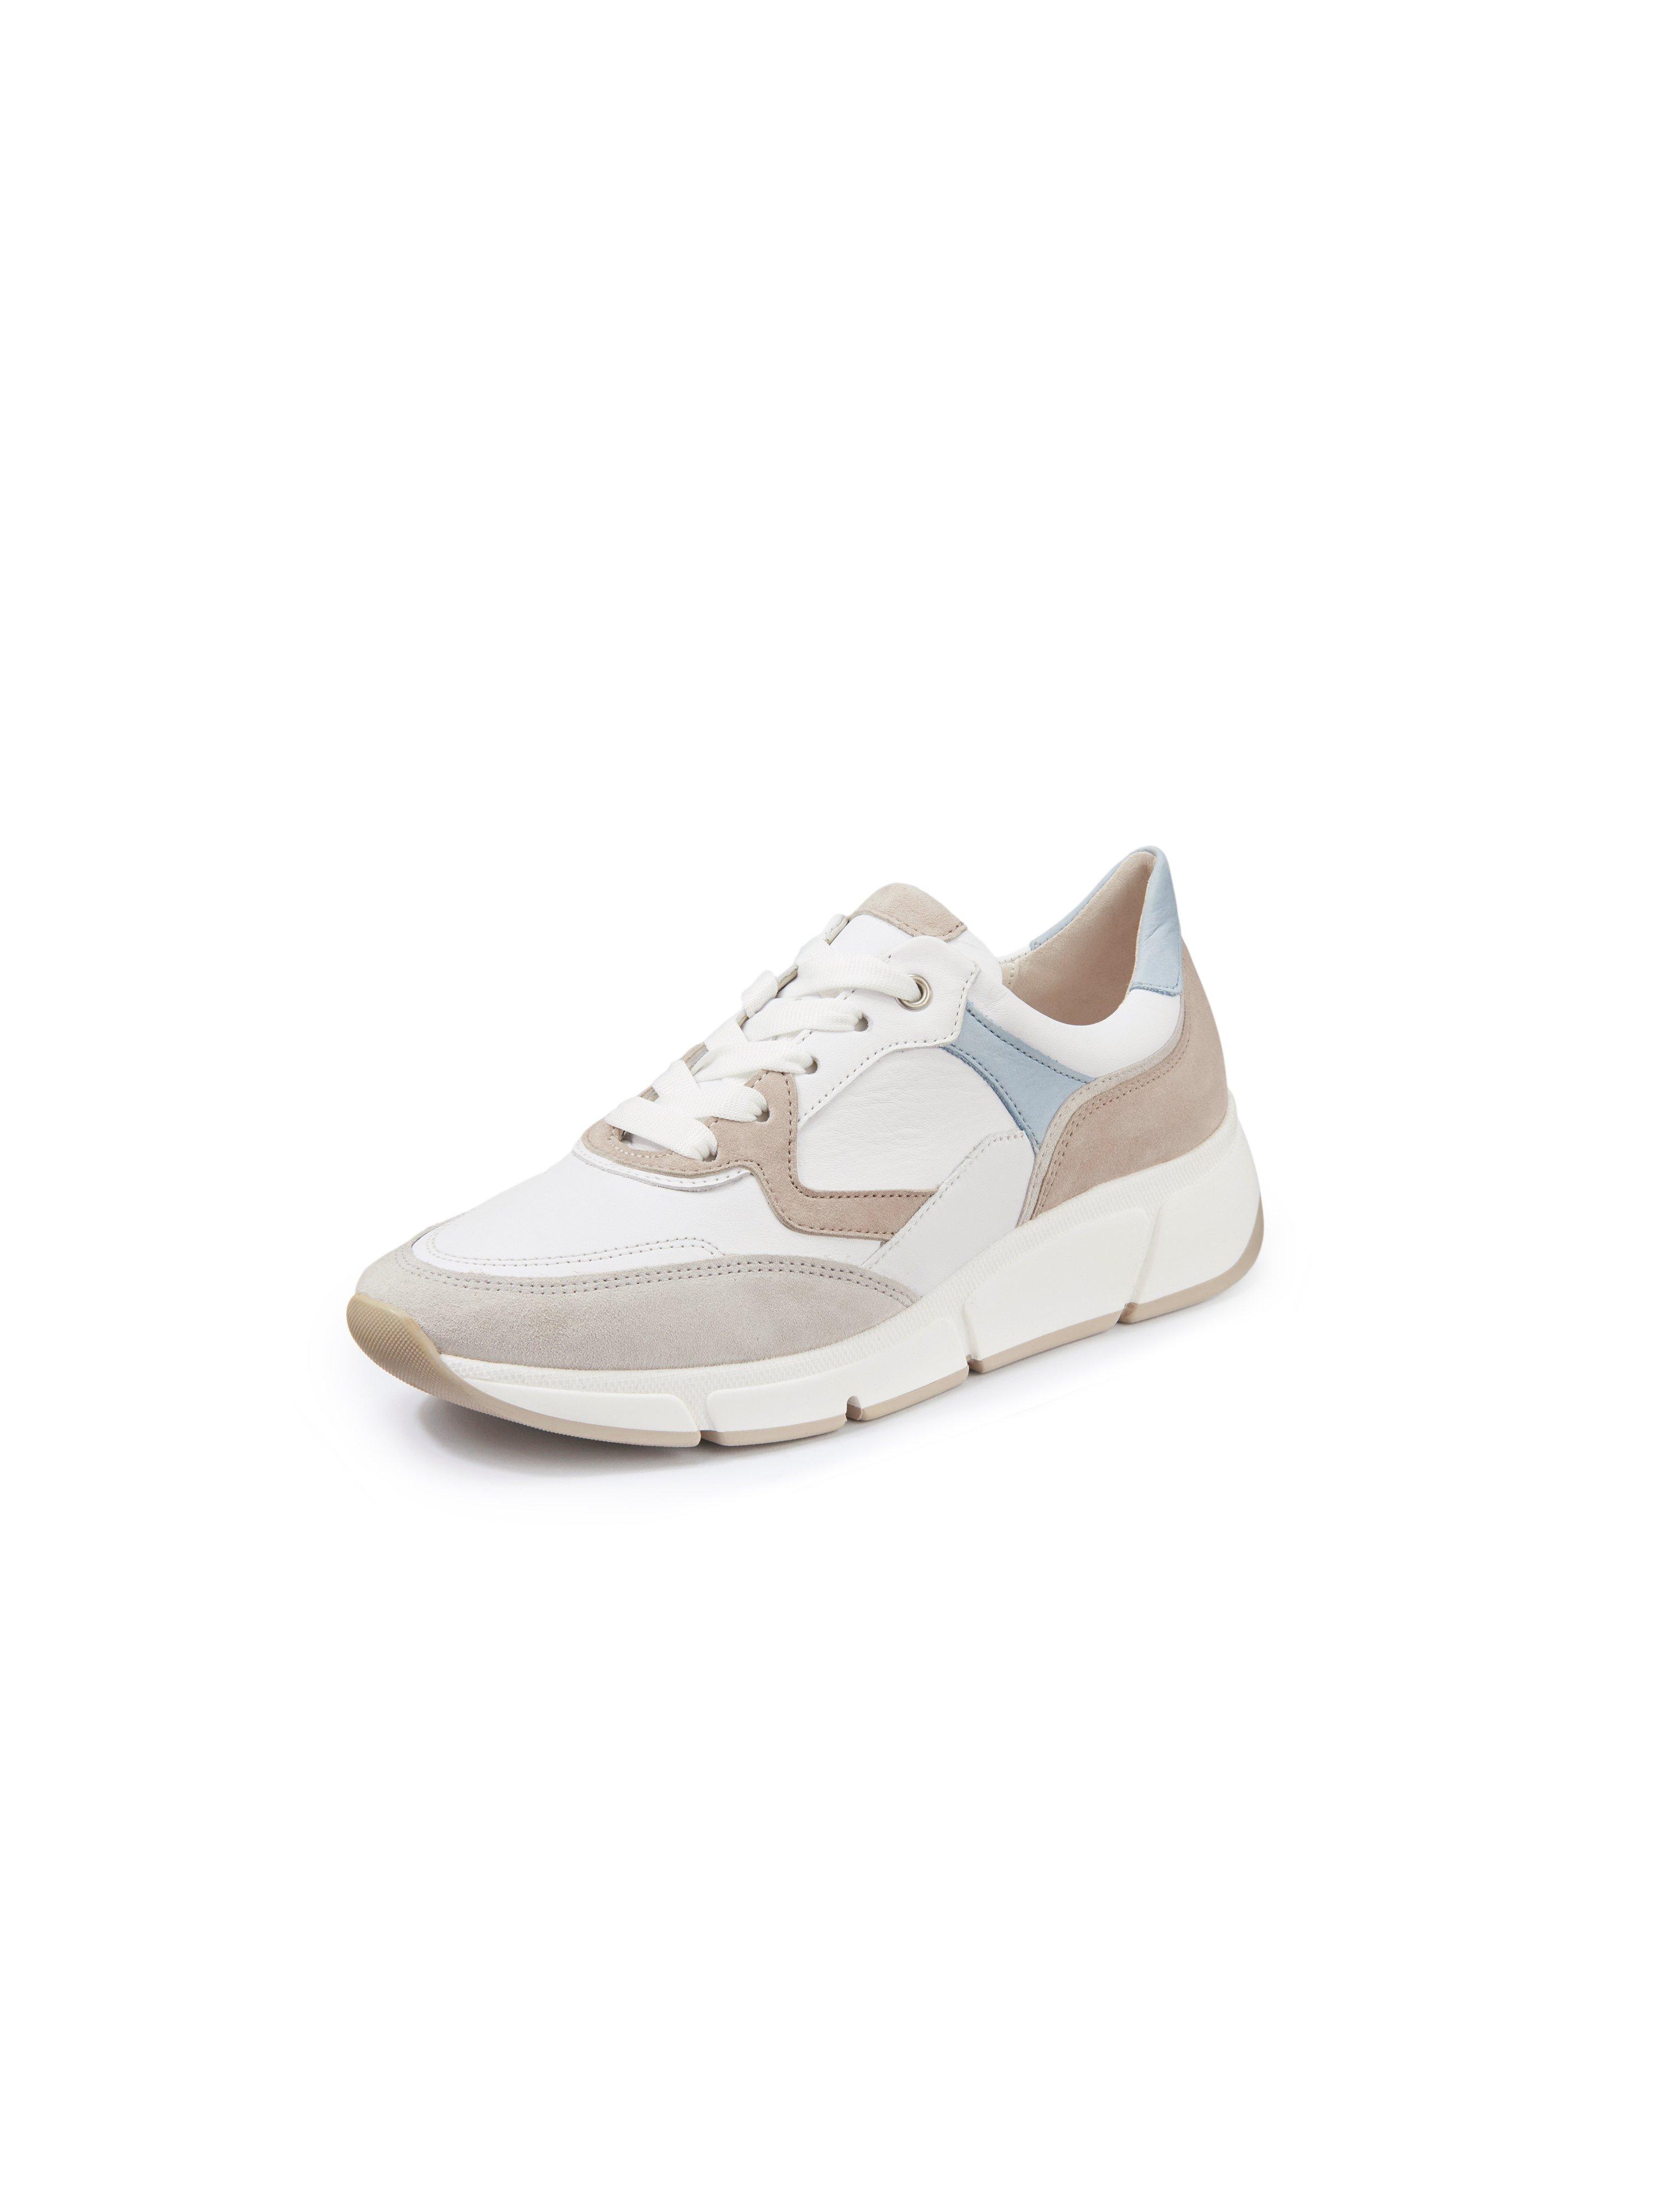 Sneakers in calf nappa leather Gabor Comfort white